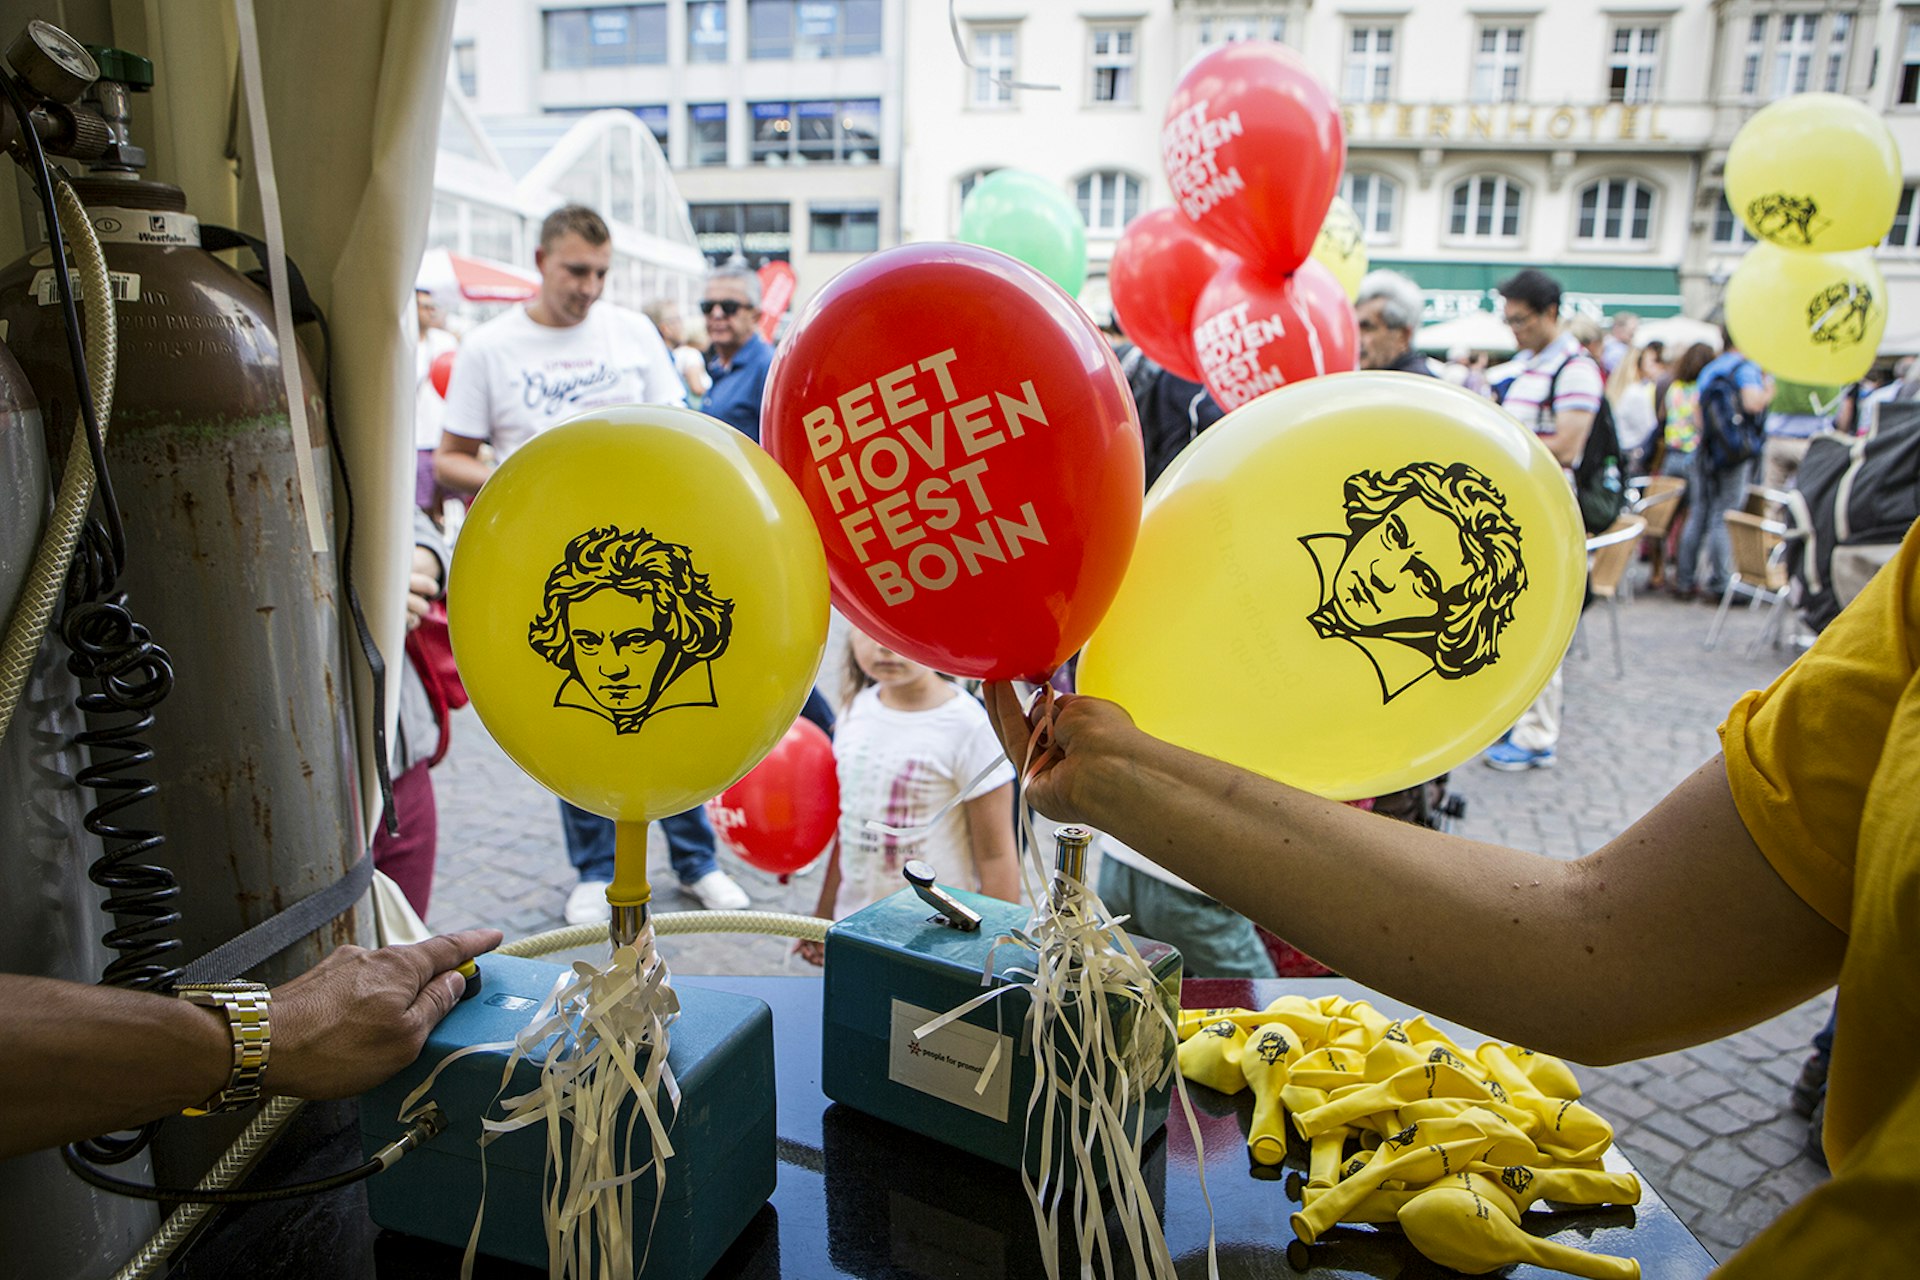 Red and yellow balloons with Beethoven's face printed on the yellow ones